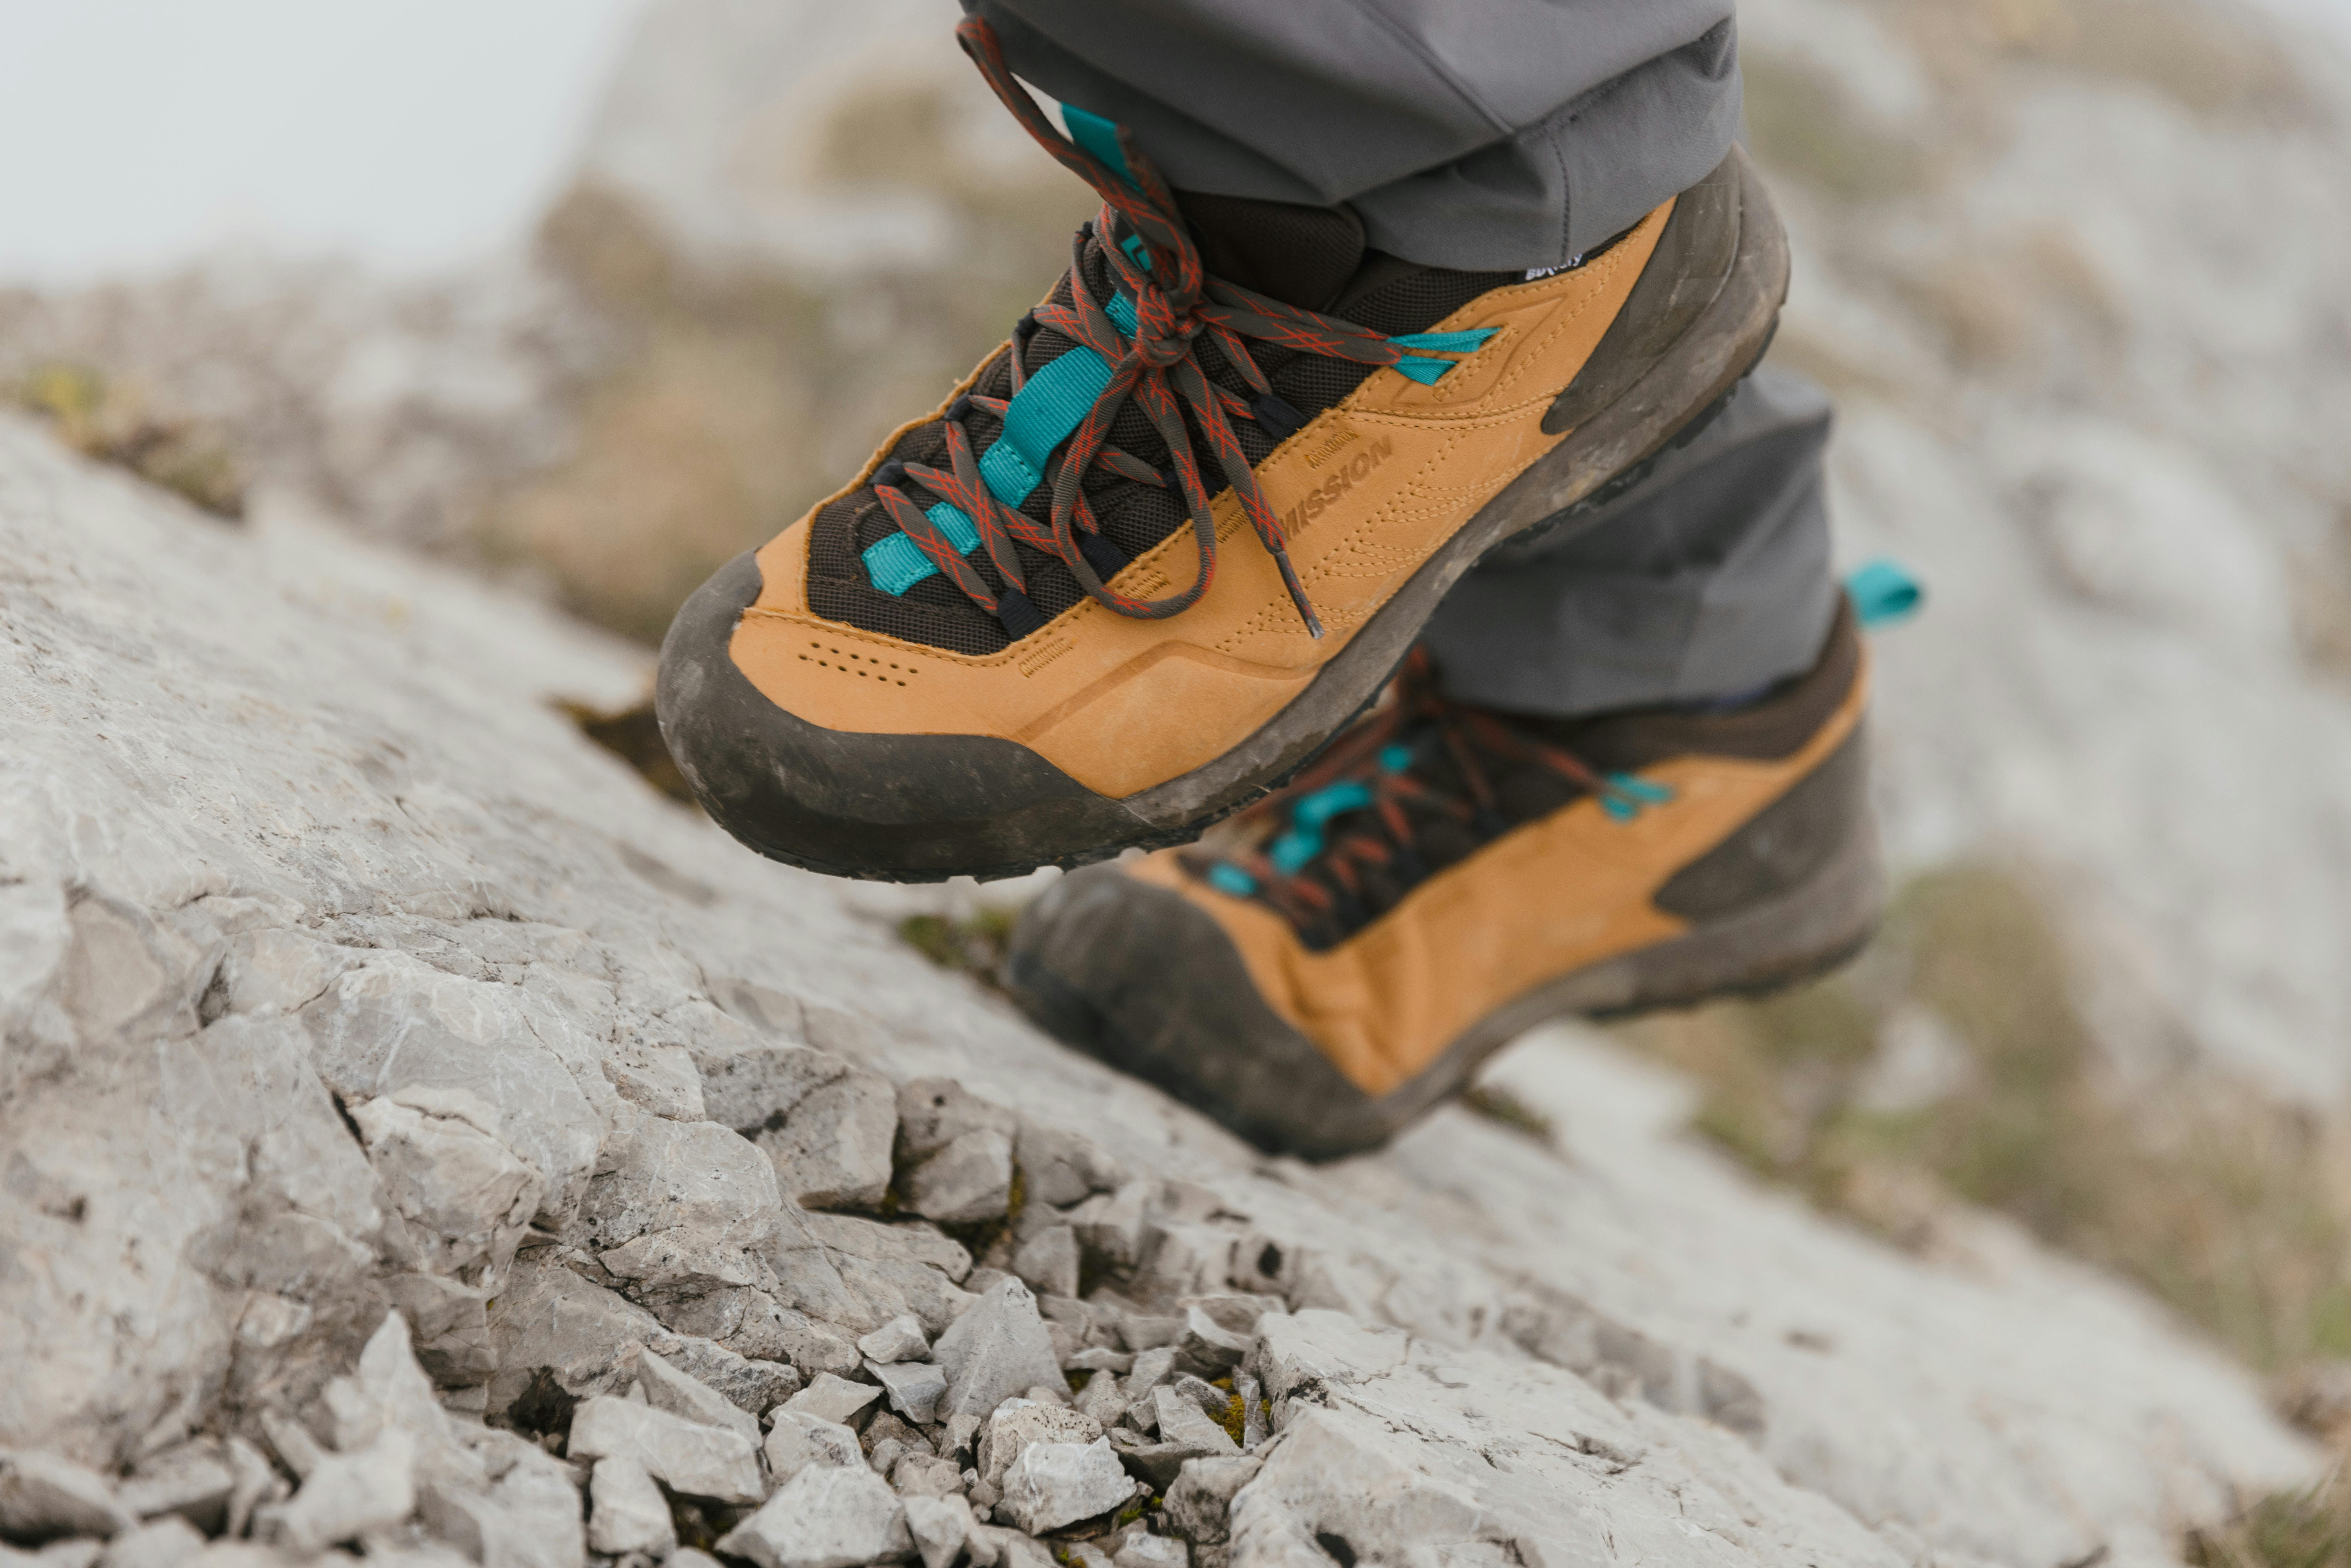 A hiker steps up steep rock in Mission Leather Approach WP Shoes.